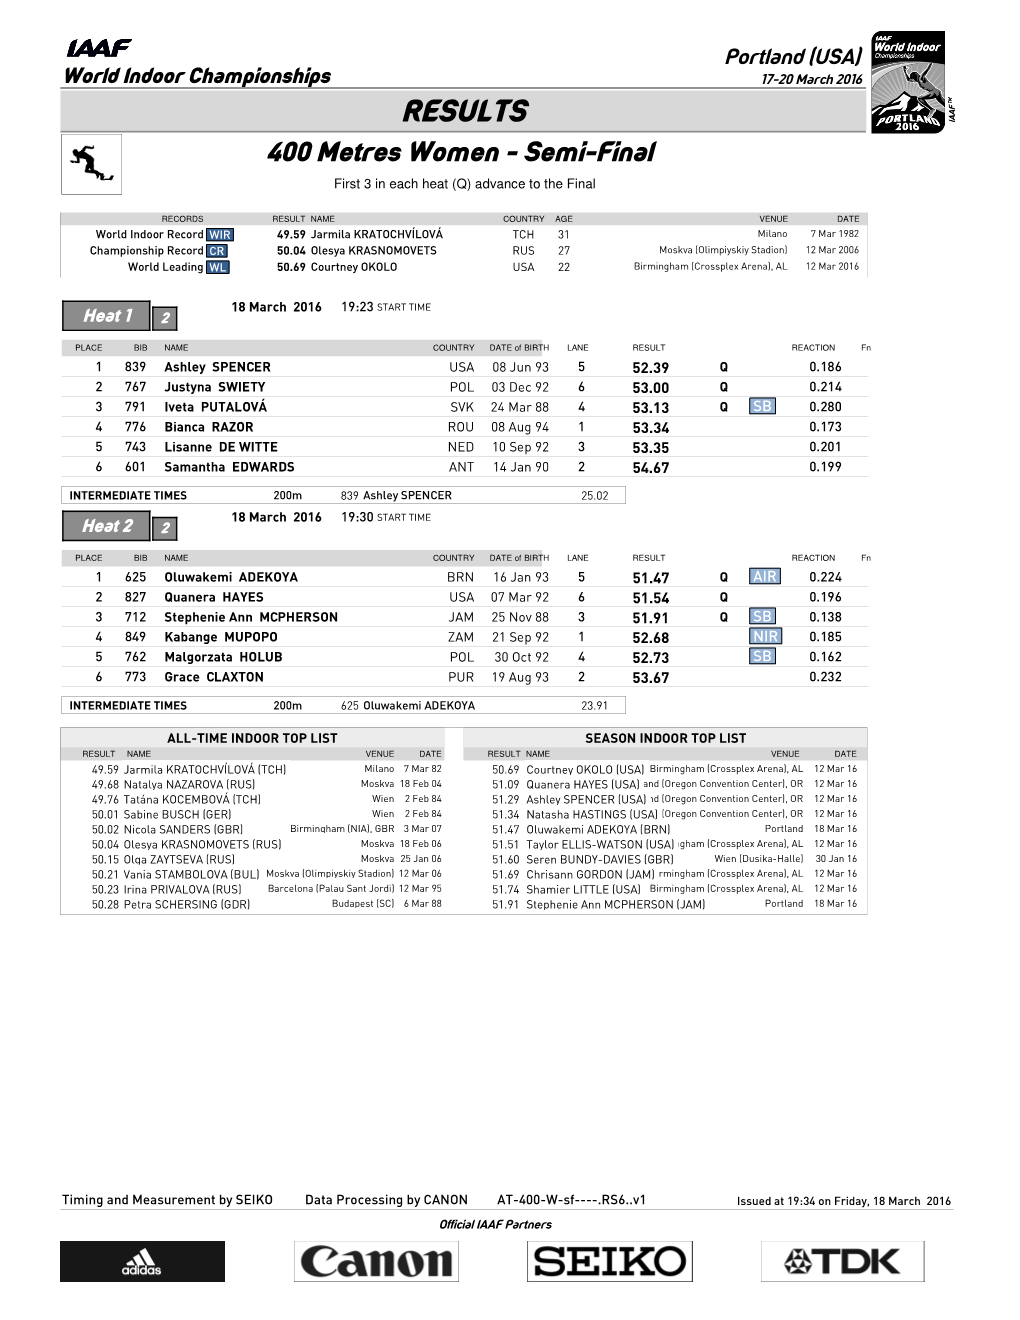 RESULTS 400 Metres Women - Semi-Final First 3 in Each Heat (Q) Advance to the Final